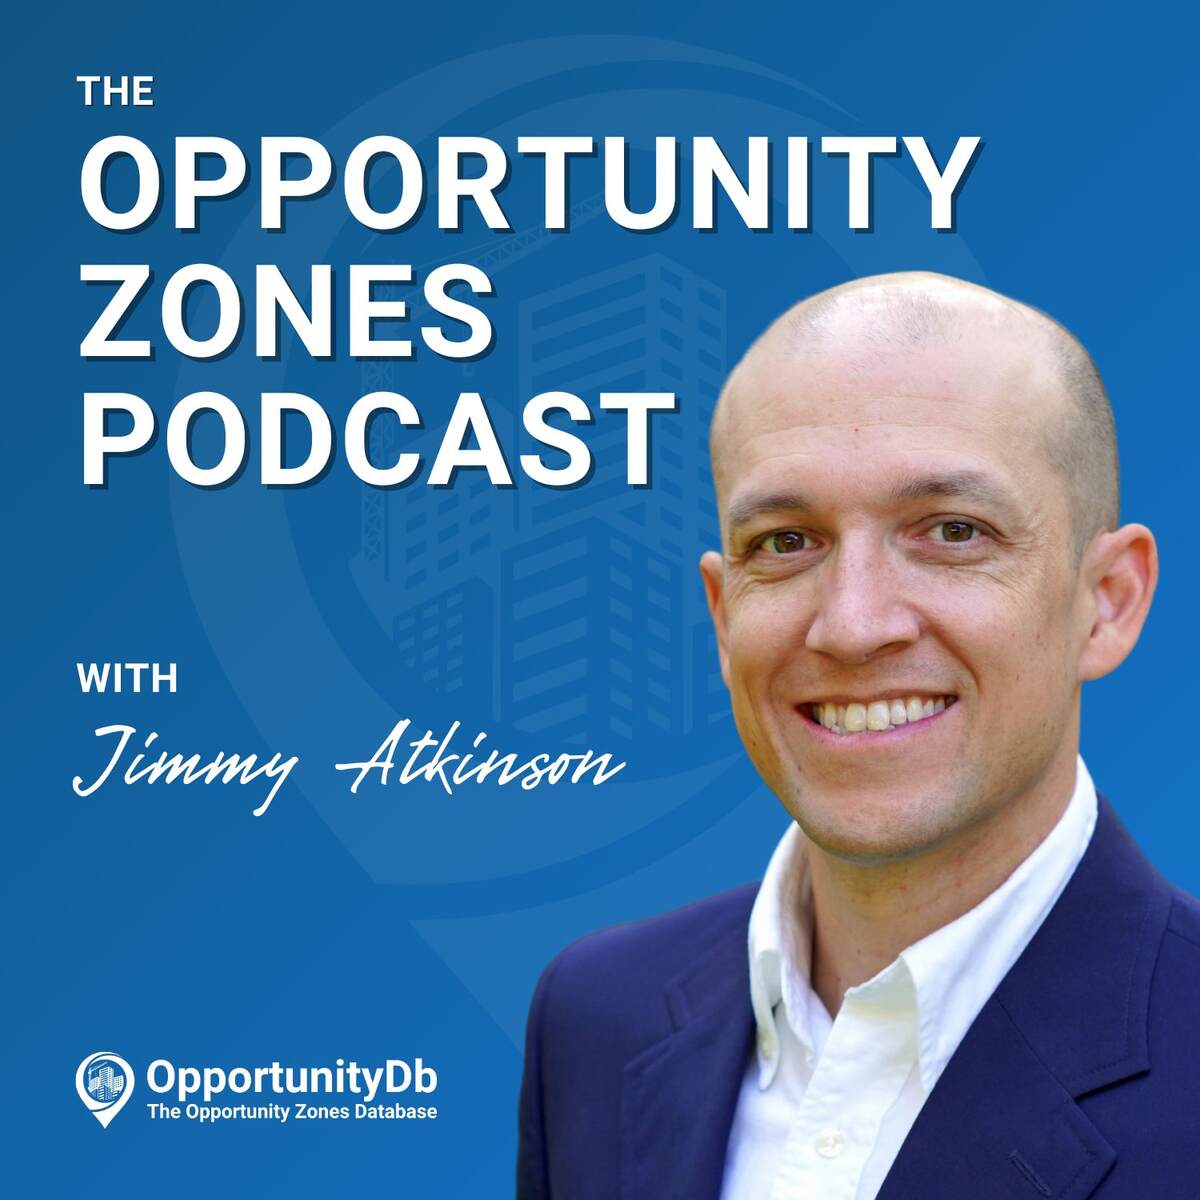 The Opportunity Zones Podcast